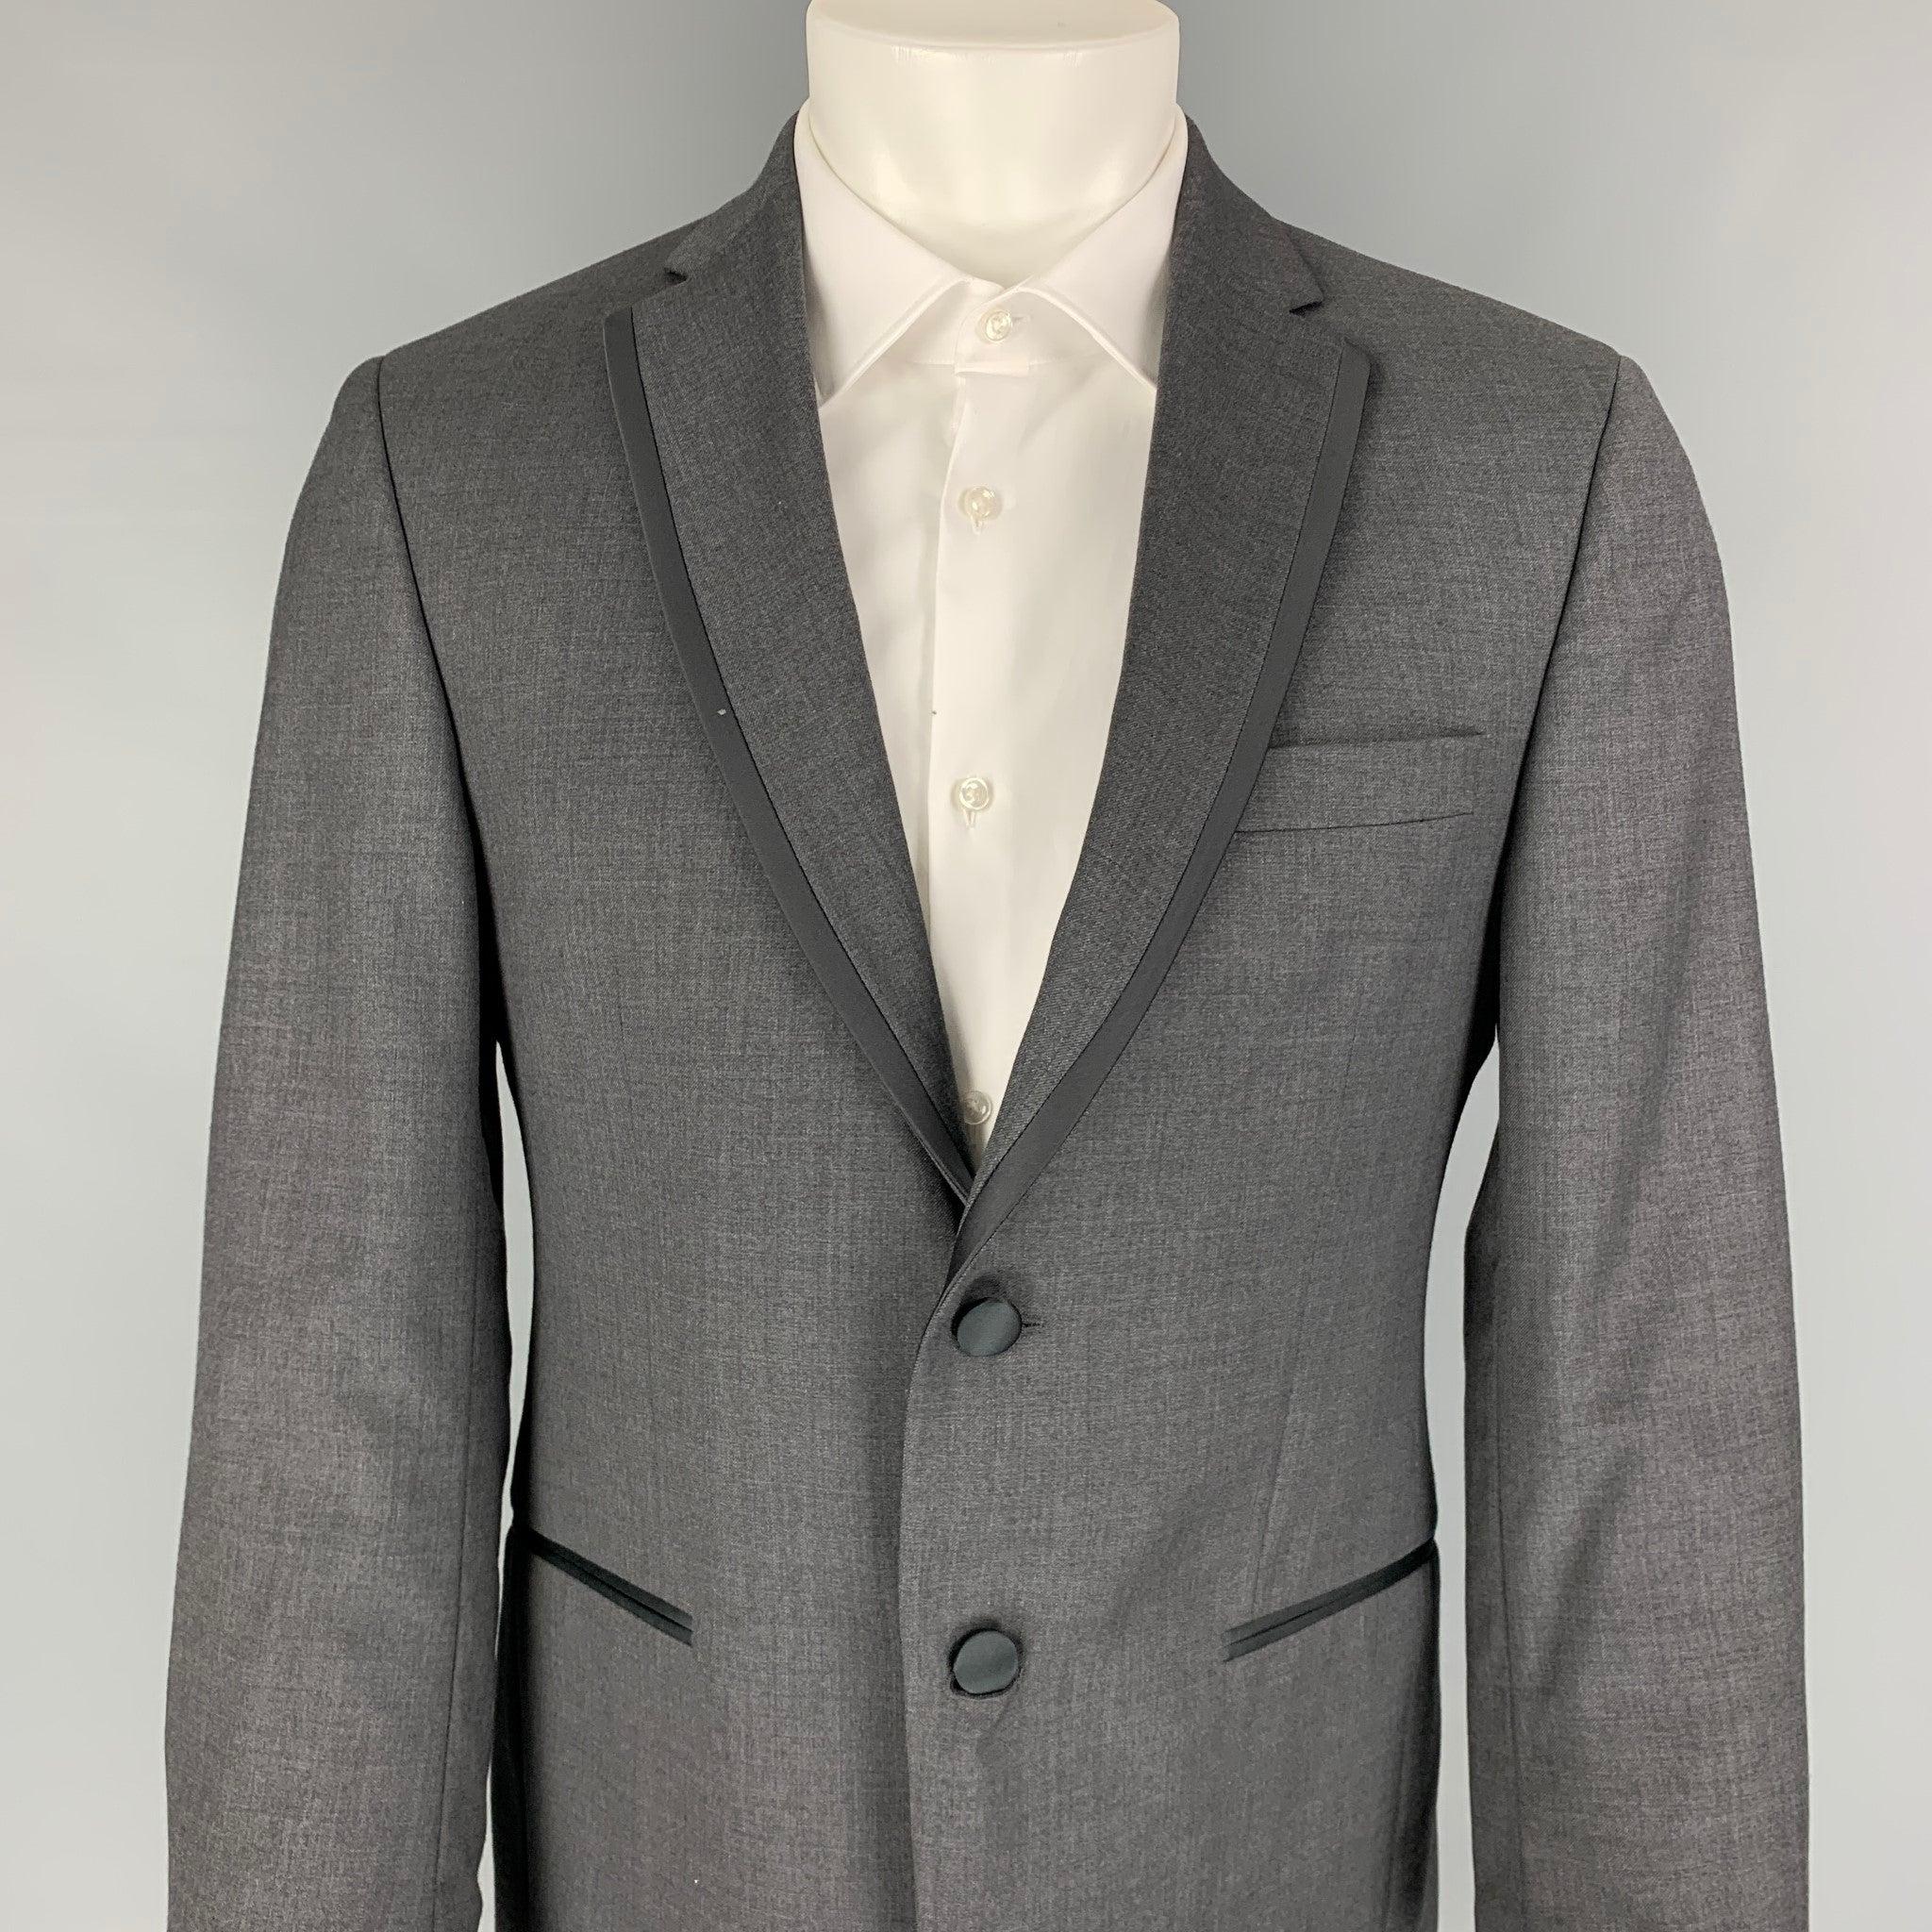 BLACK by VERA WANG sport coat comes in a grey & black wool with a full liner featuring a notch lapel, satin trim, double back vent, slit pockets, and a double button closure.
Excellent
Pre-Owned Condition.  

Marked:   38 

Measurements: 
